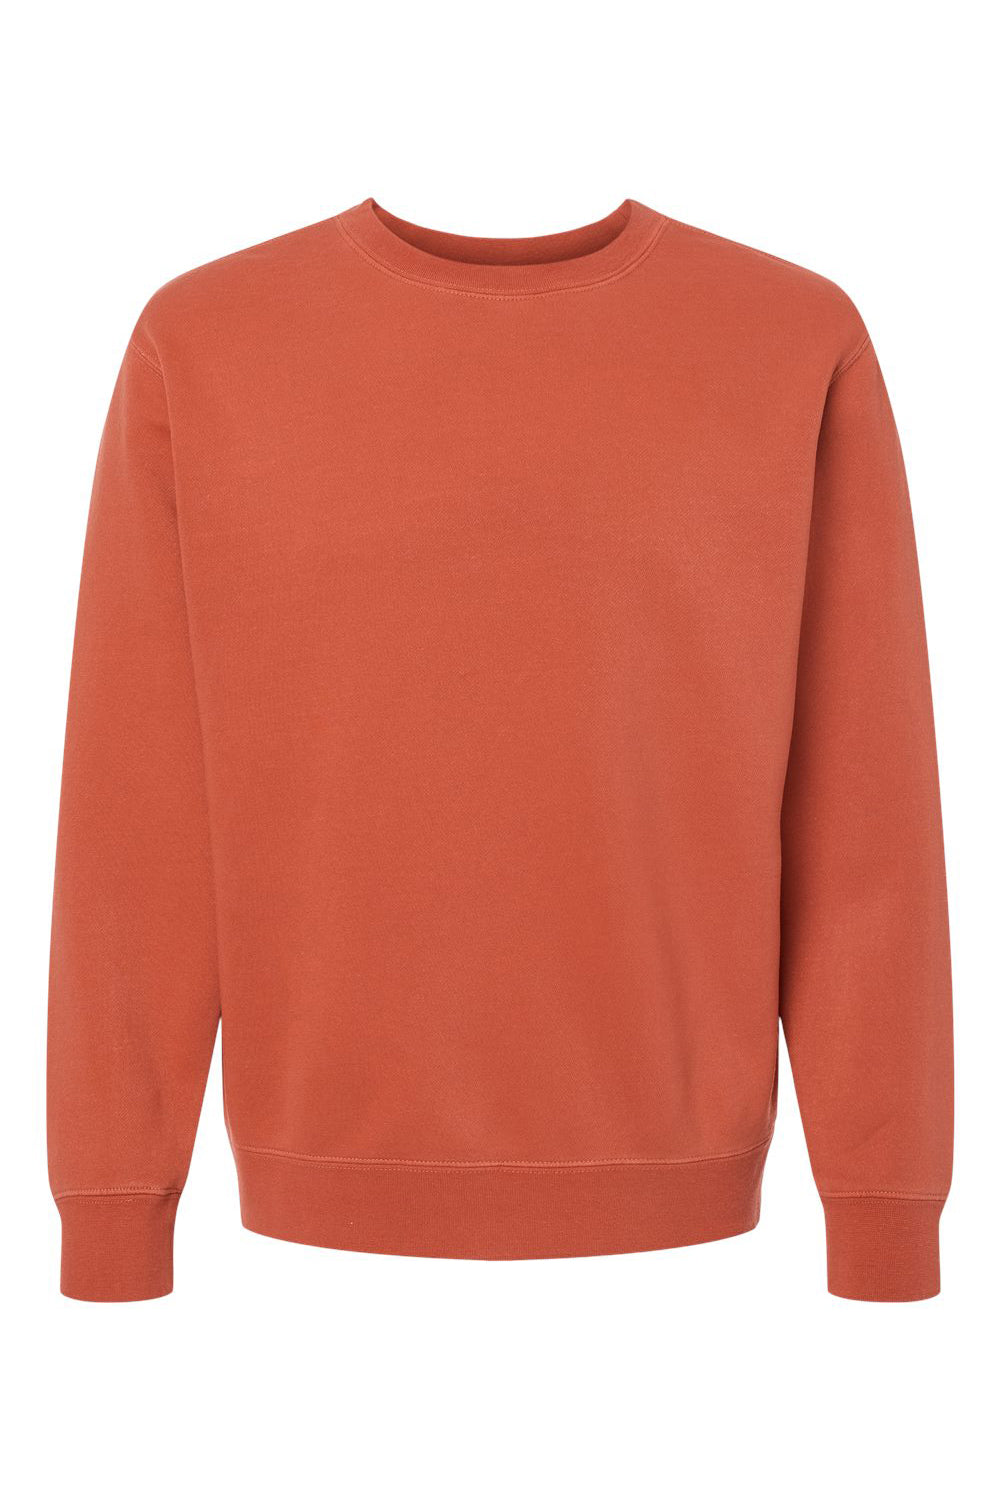 Independent Trading Co. PRM3500 Mens Pigment Dyed Crewneck Sweatshirt Amber Flat Front